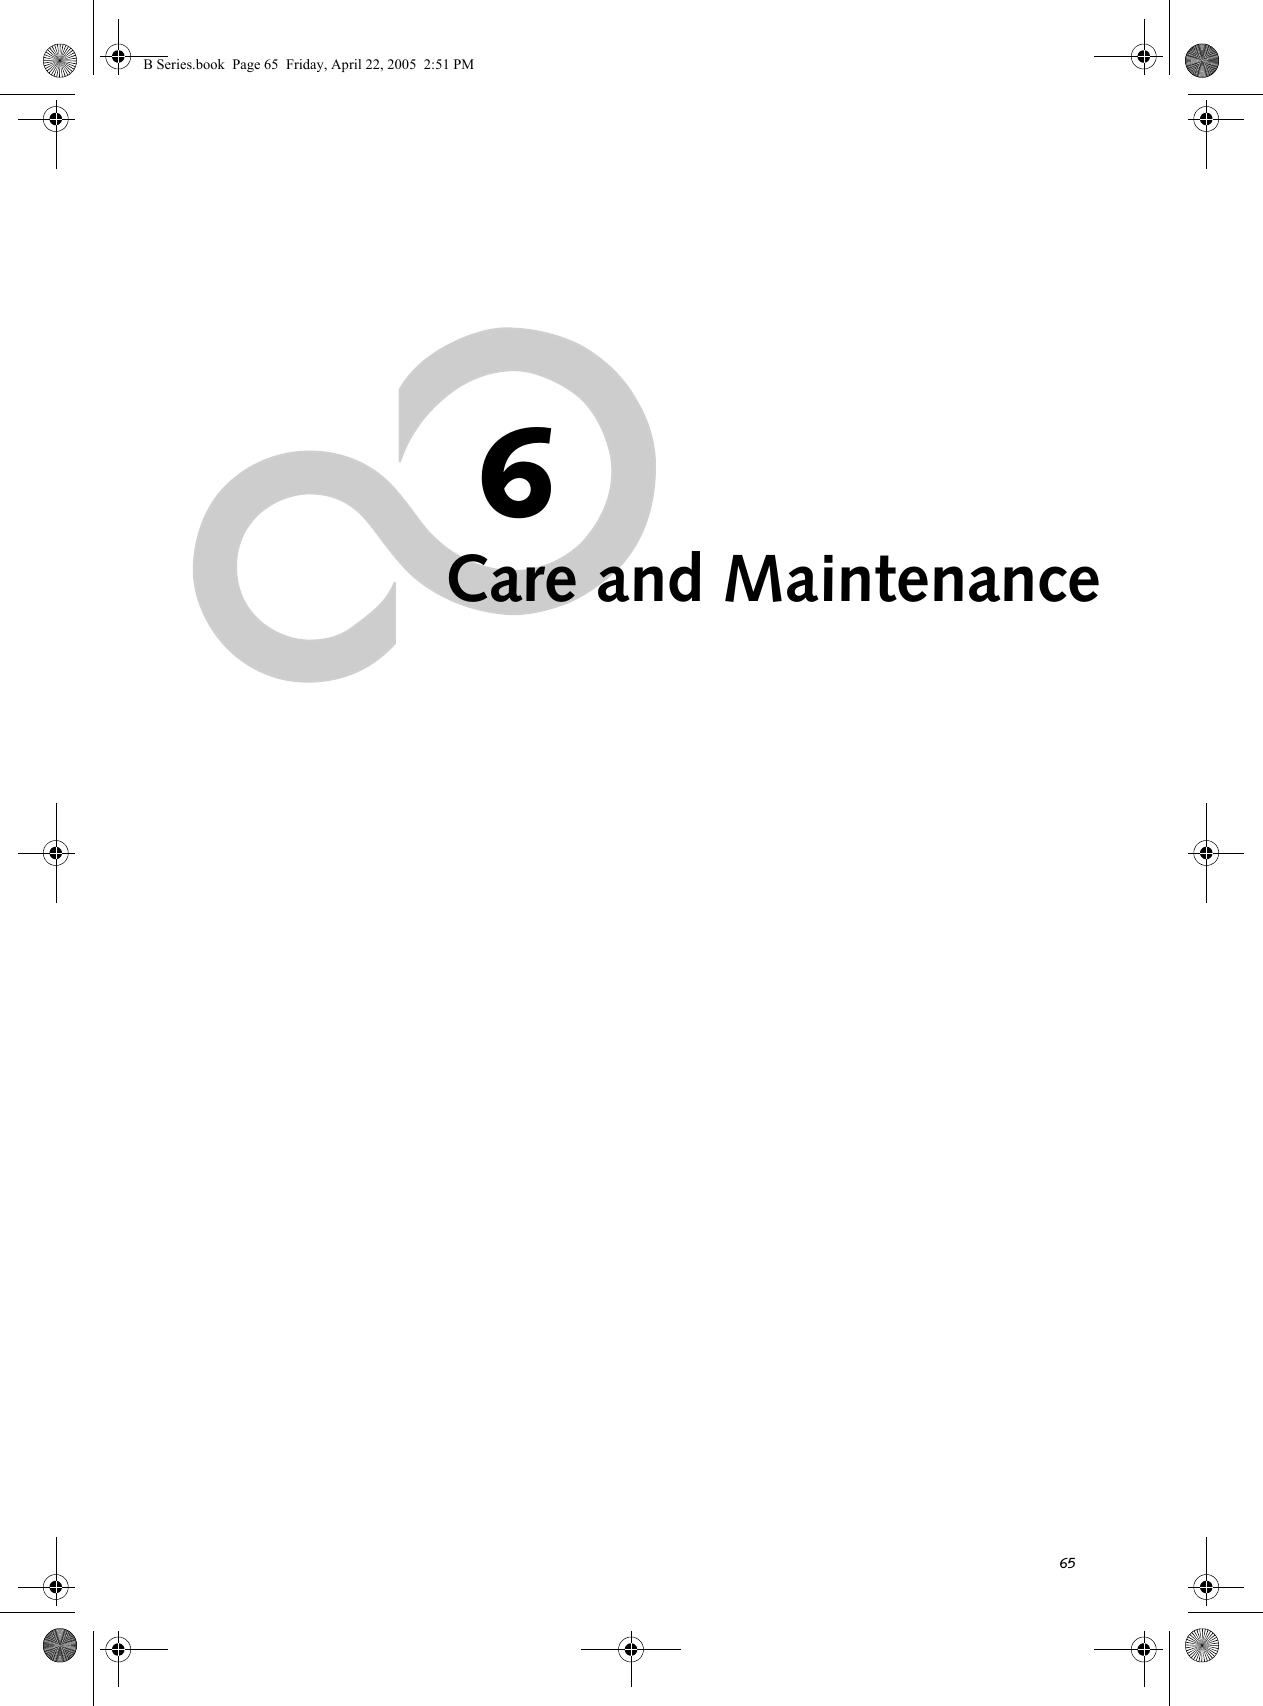 656Care and MaintenanceB Series.book  Page 65  Friday, April 22, 2005  2:51 PM